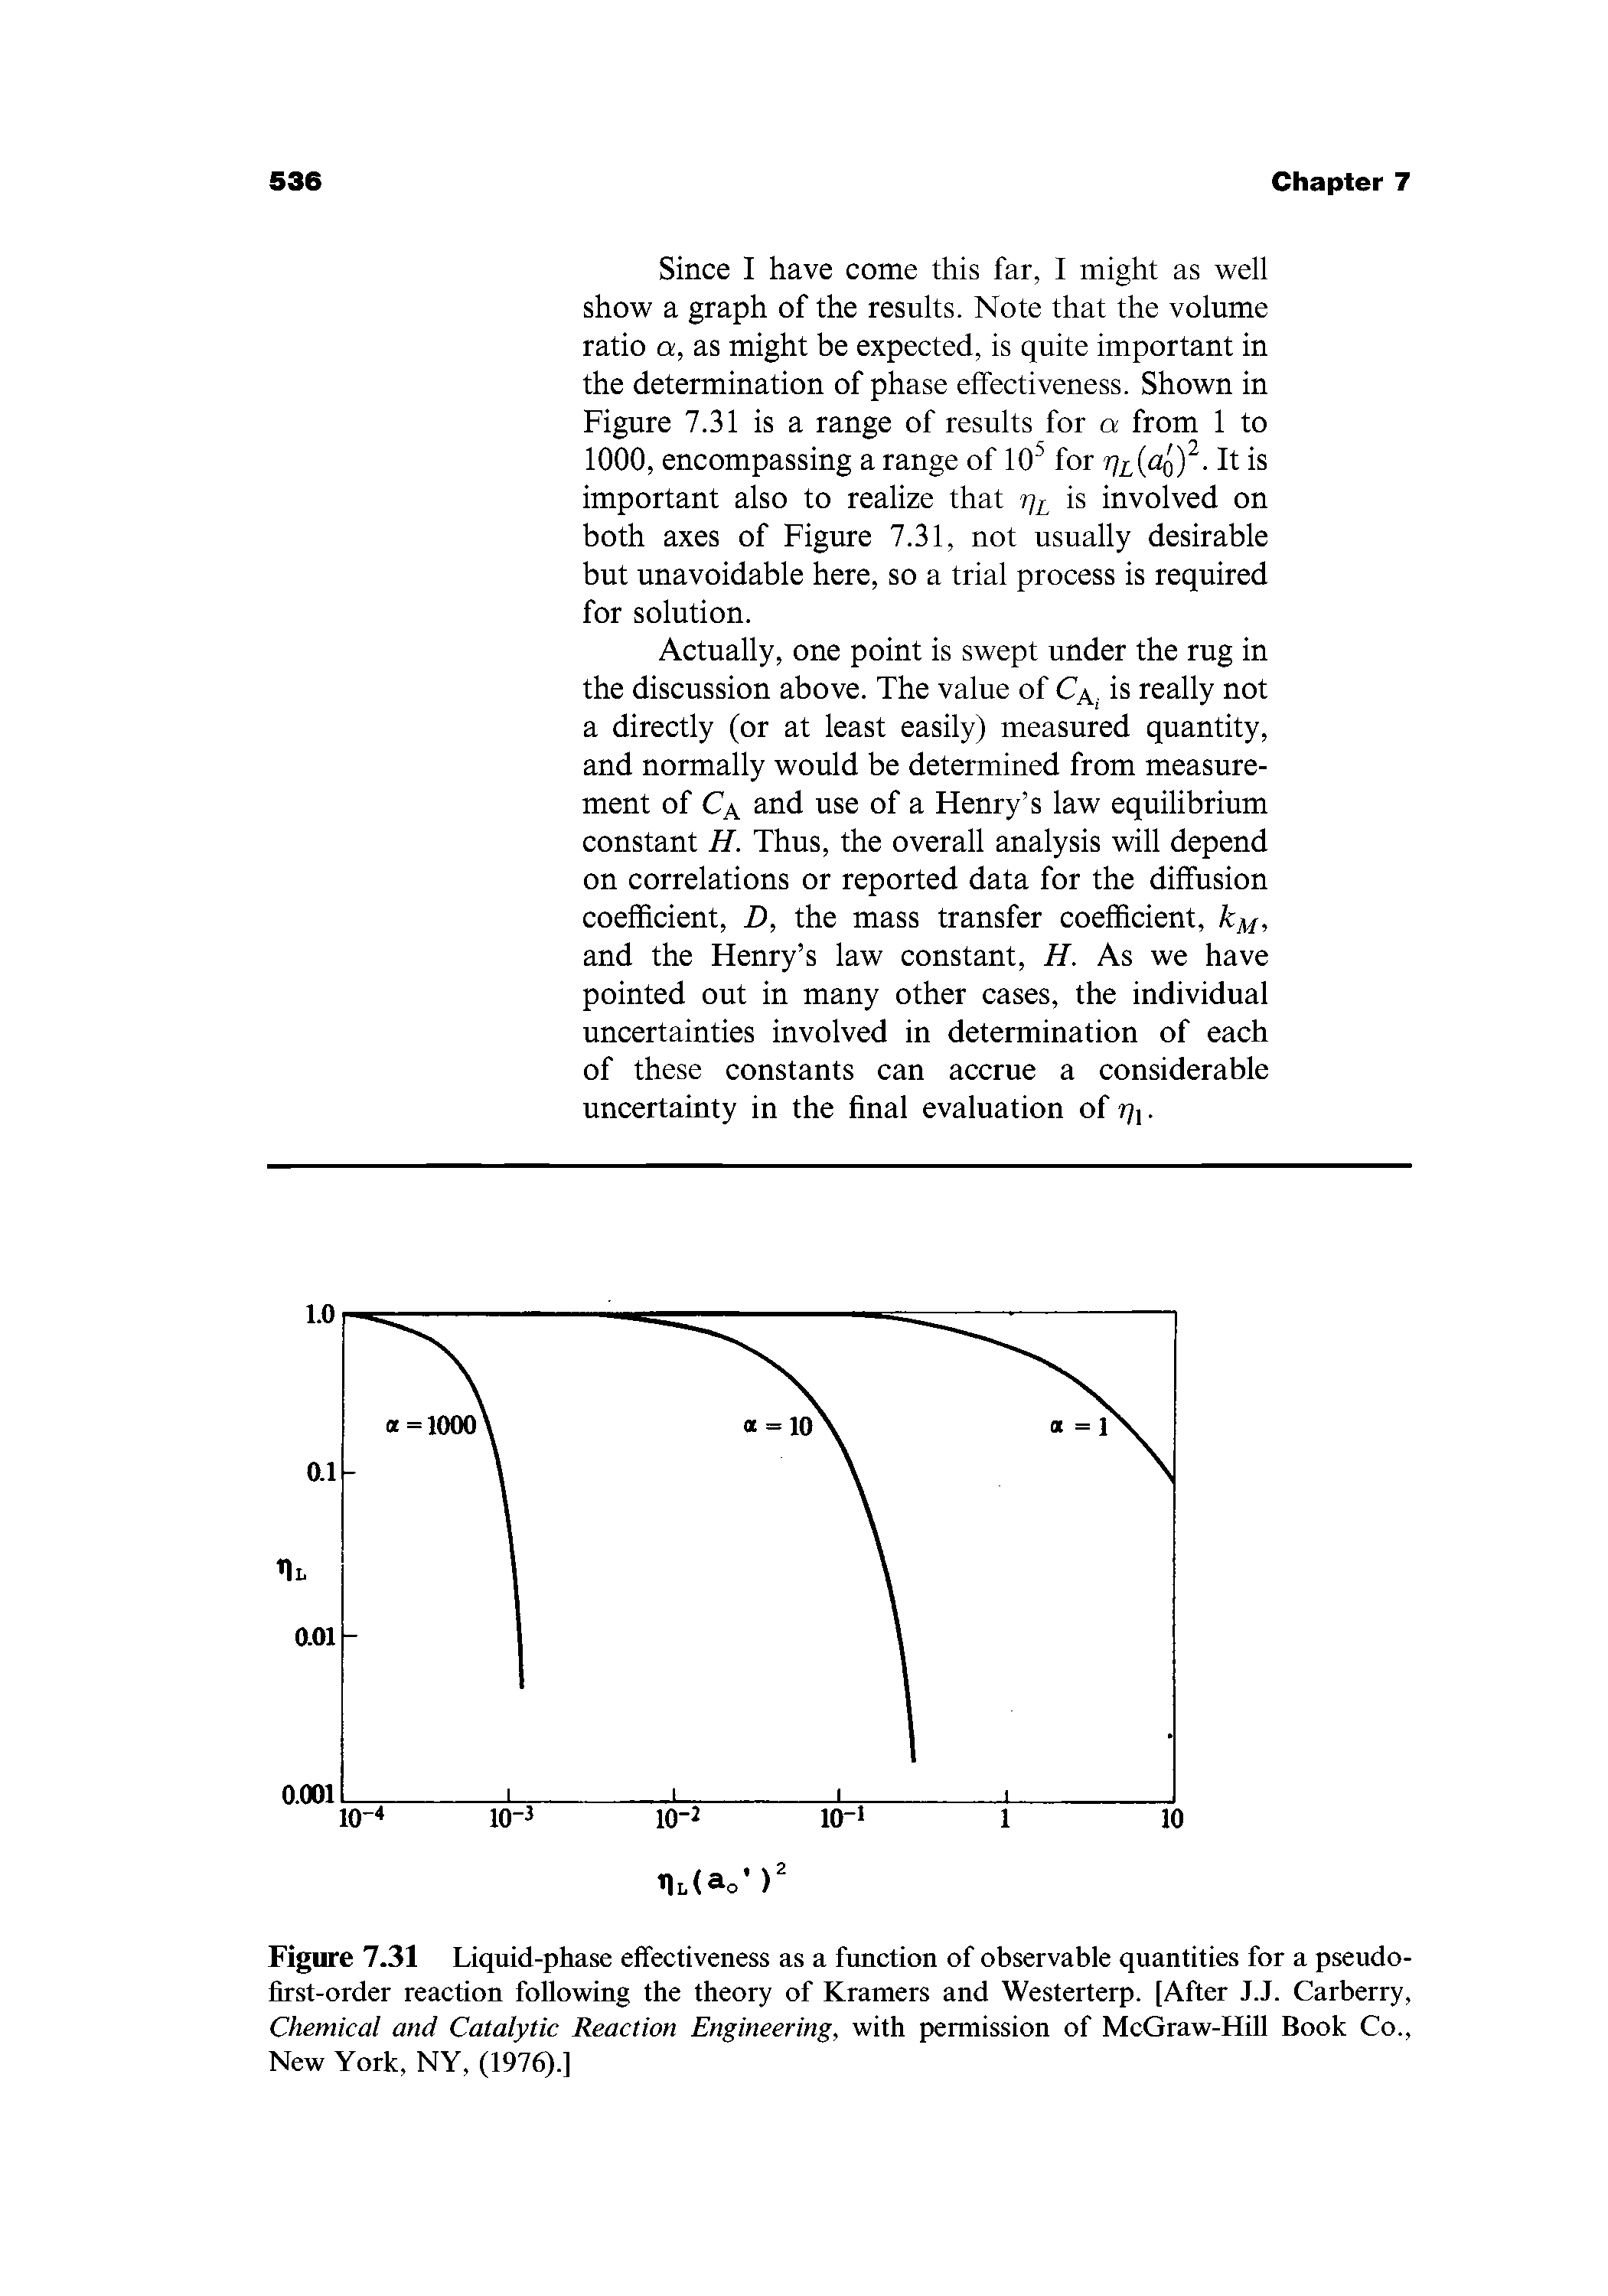 Figure 7.31 Liquid-phase effectiveness as a function of observable quantities for a pseudo-first-order reaction foifowing the theory of Kramers and Westerterp. [After J.J. Carberry, Chemical and Catalytic Reaction Engineering, with permission of McGraw-Hill Book Co., New York, NY, (1976).]...